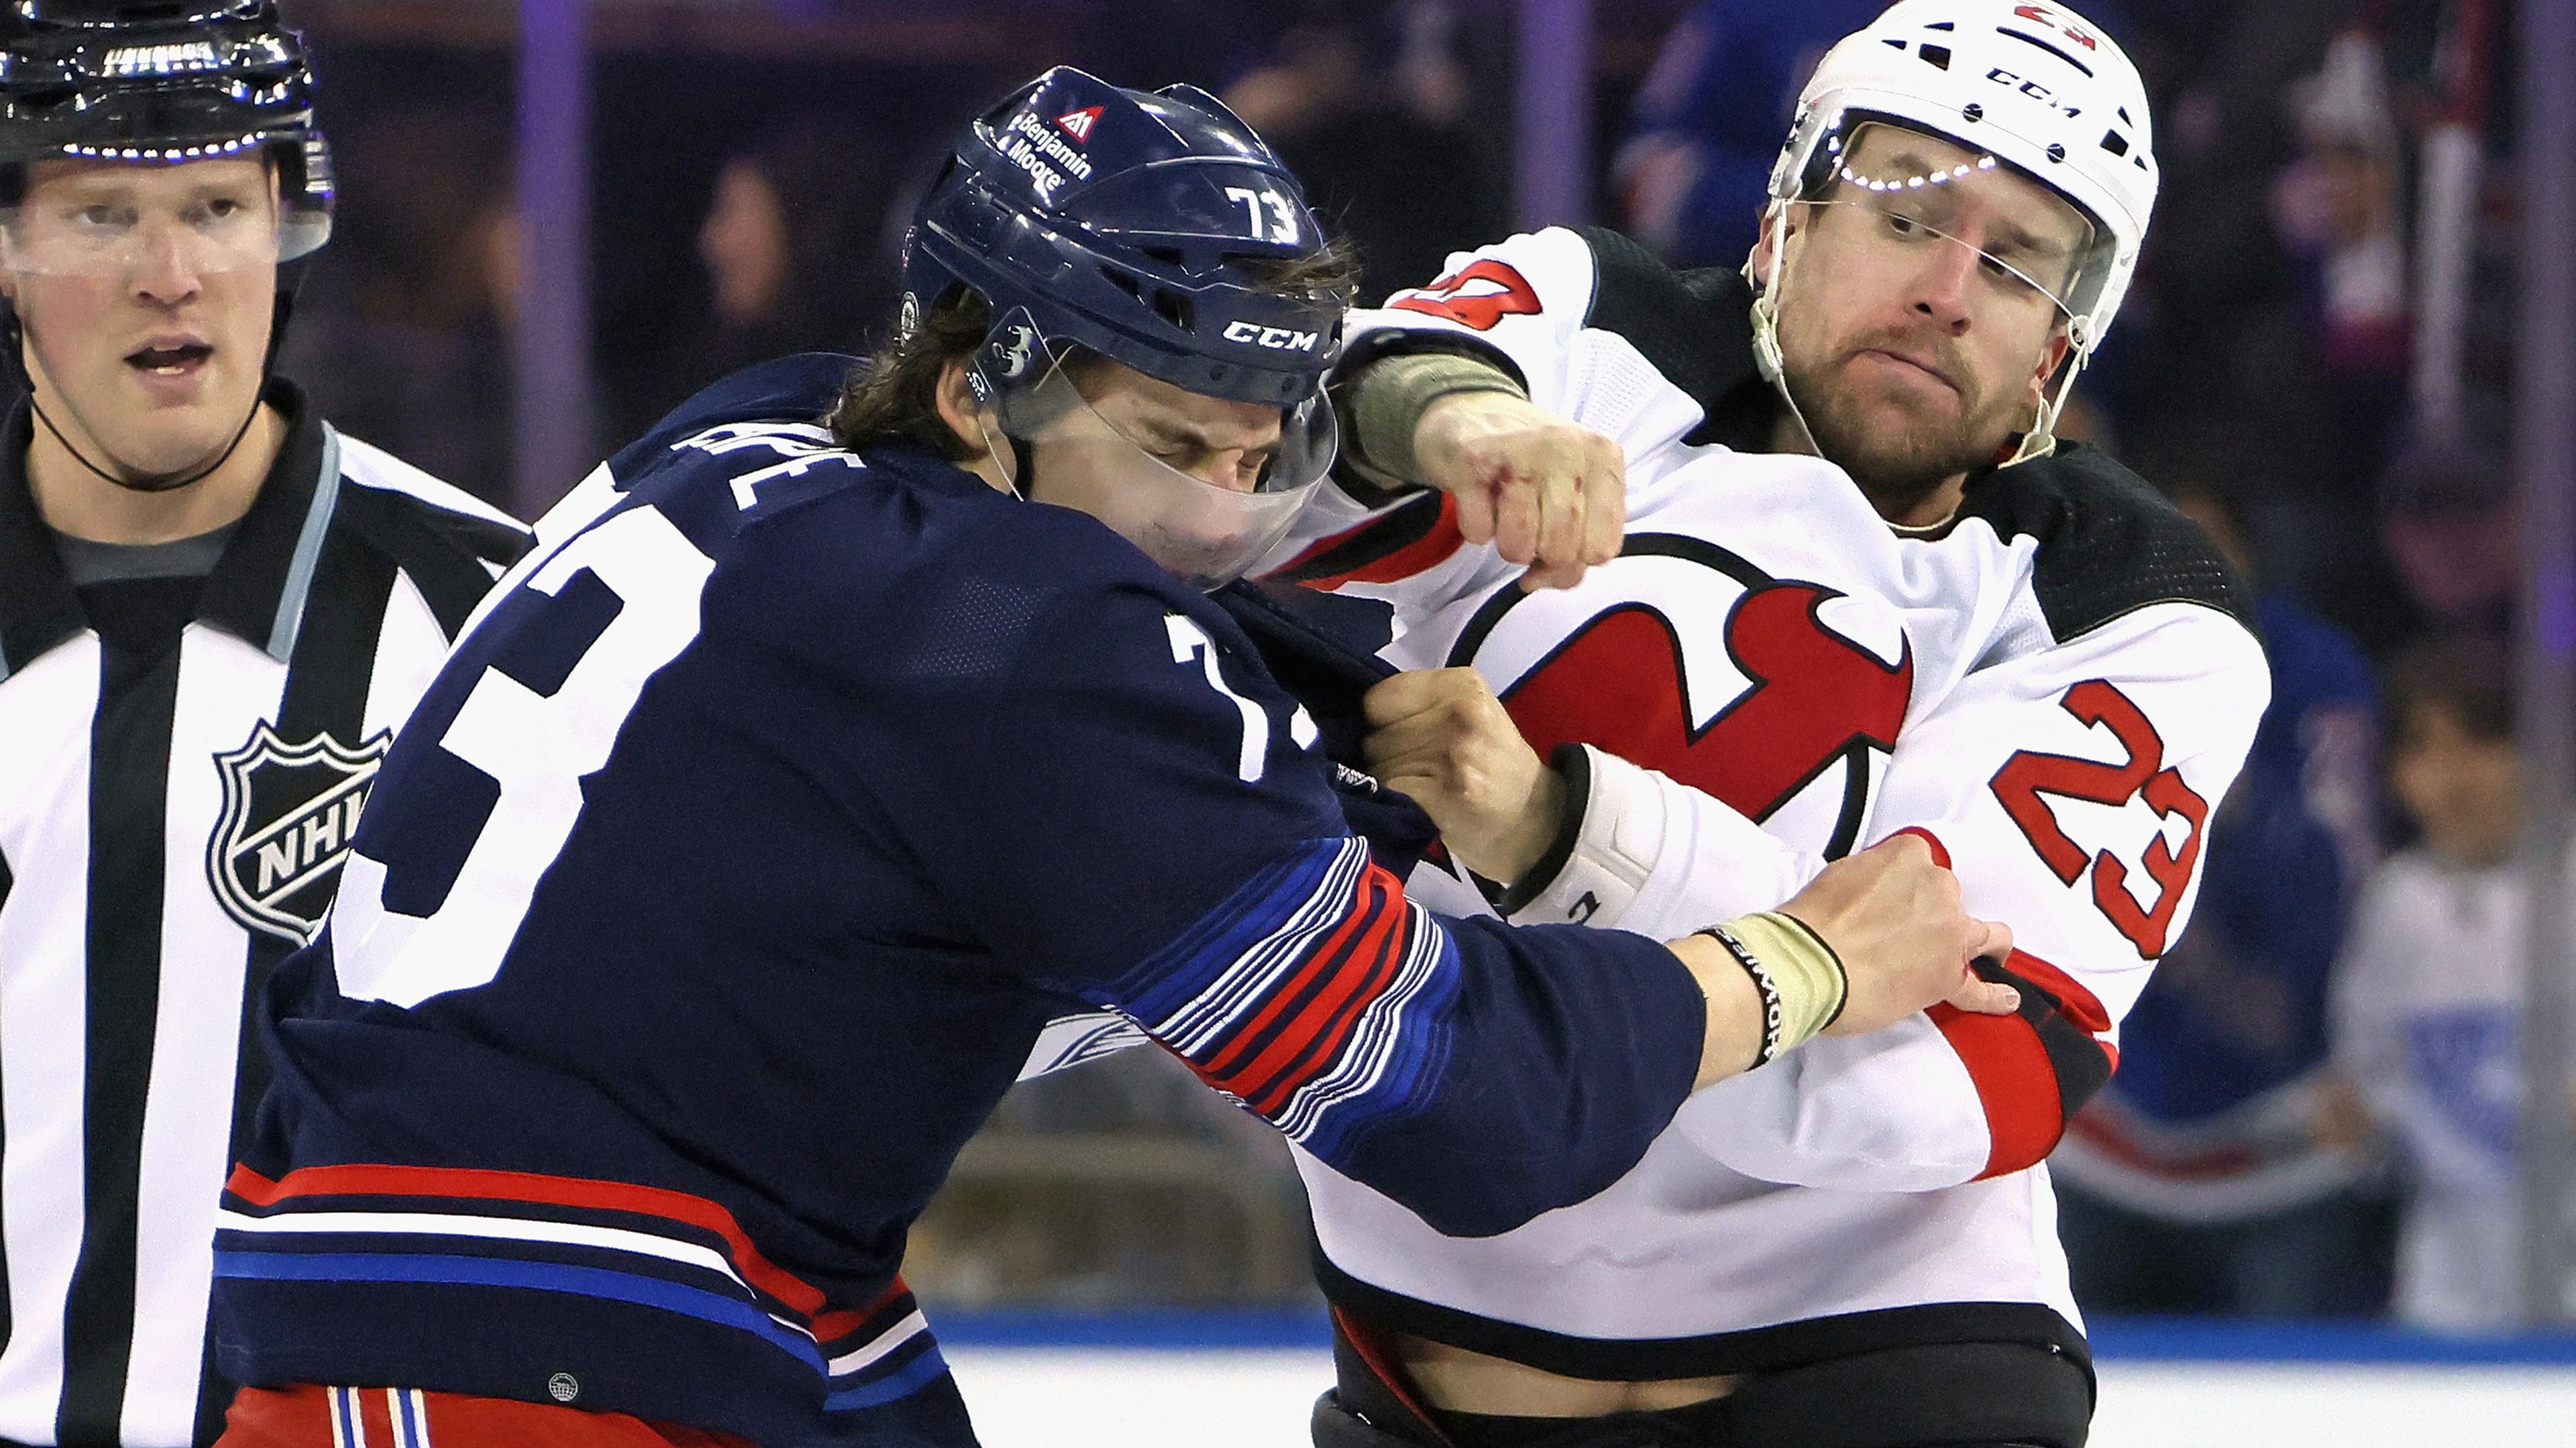 Kurtis MacDermid of the New Jersey Devils fights with Matt Rempe of the New York Rangers.